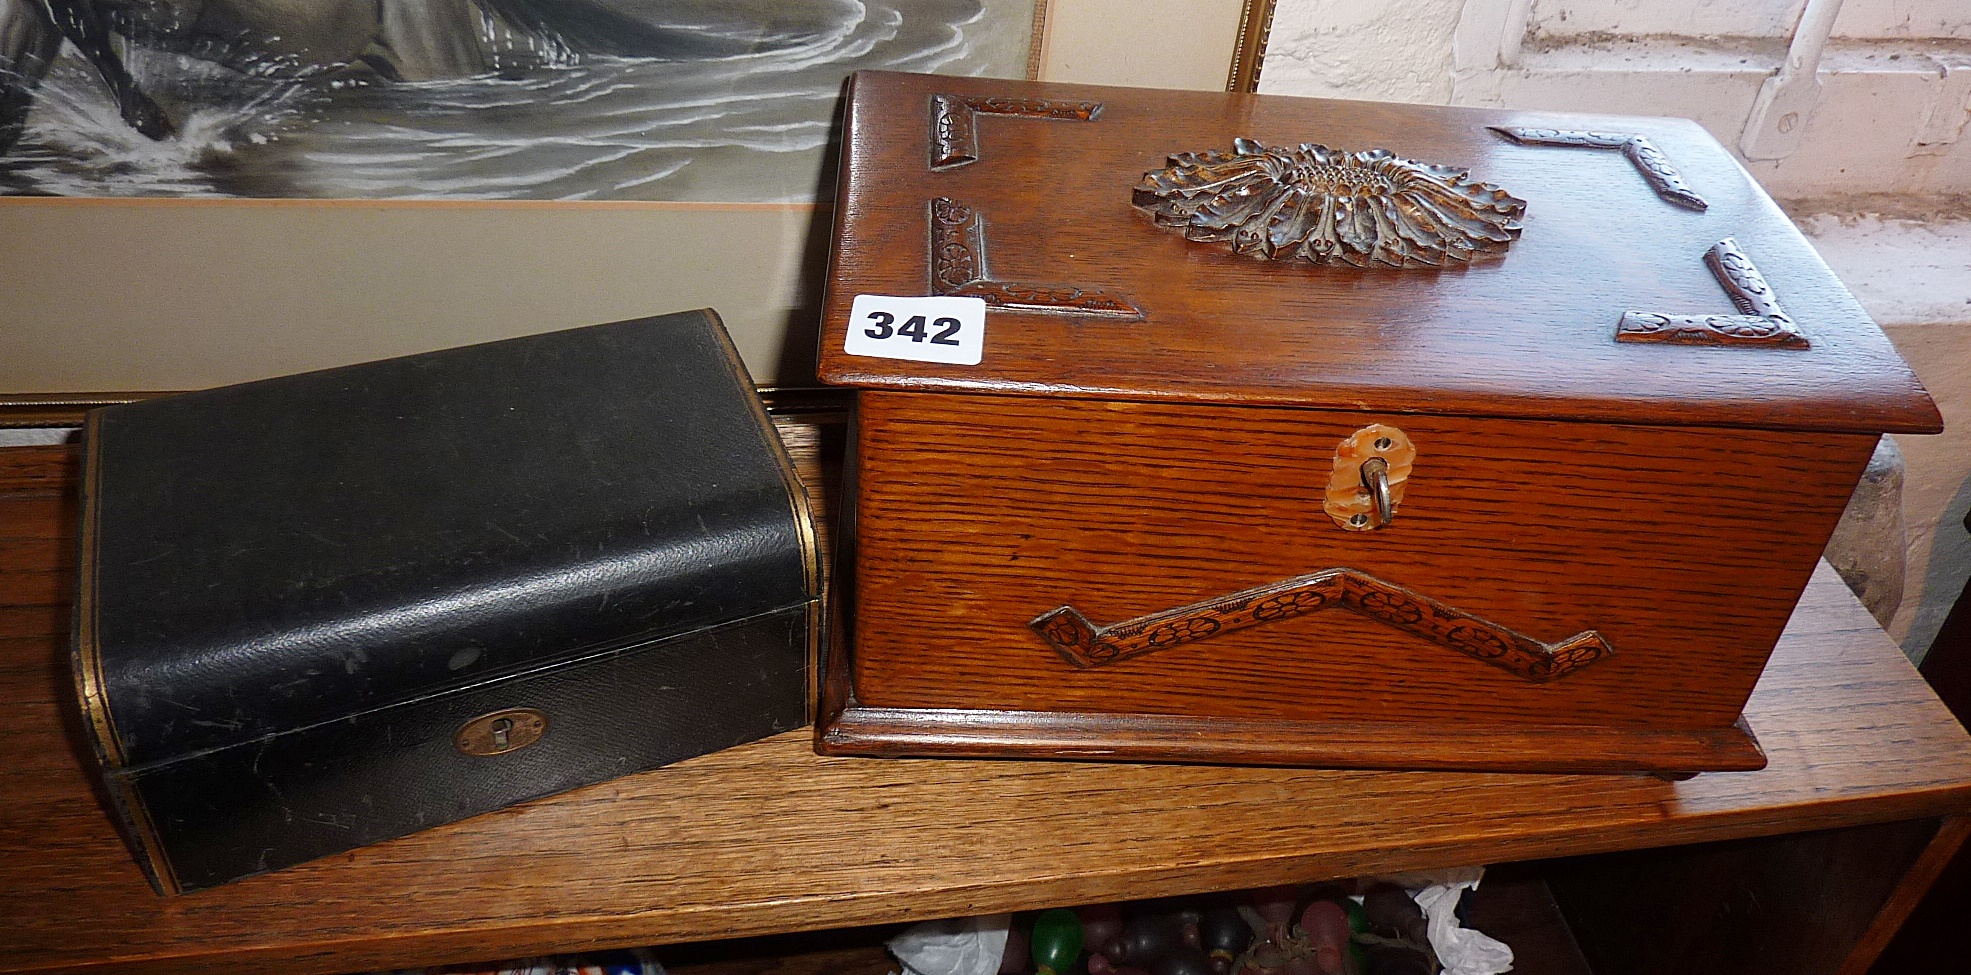 Oak jewellery box with drawers and a similar leather covered